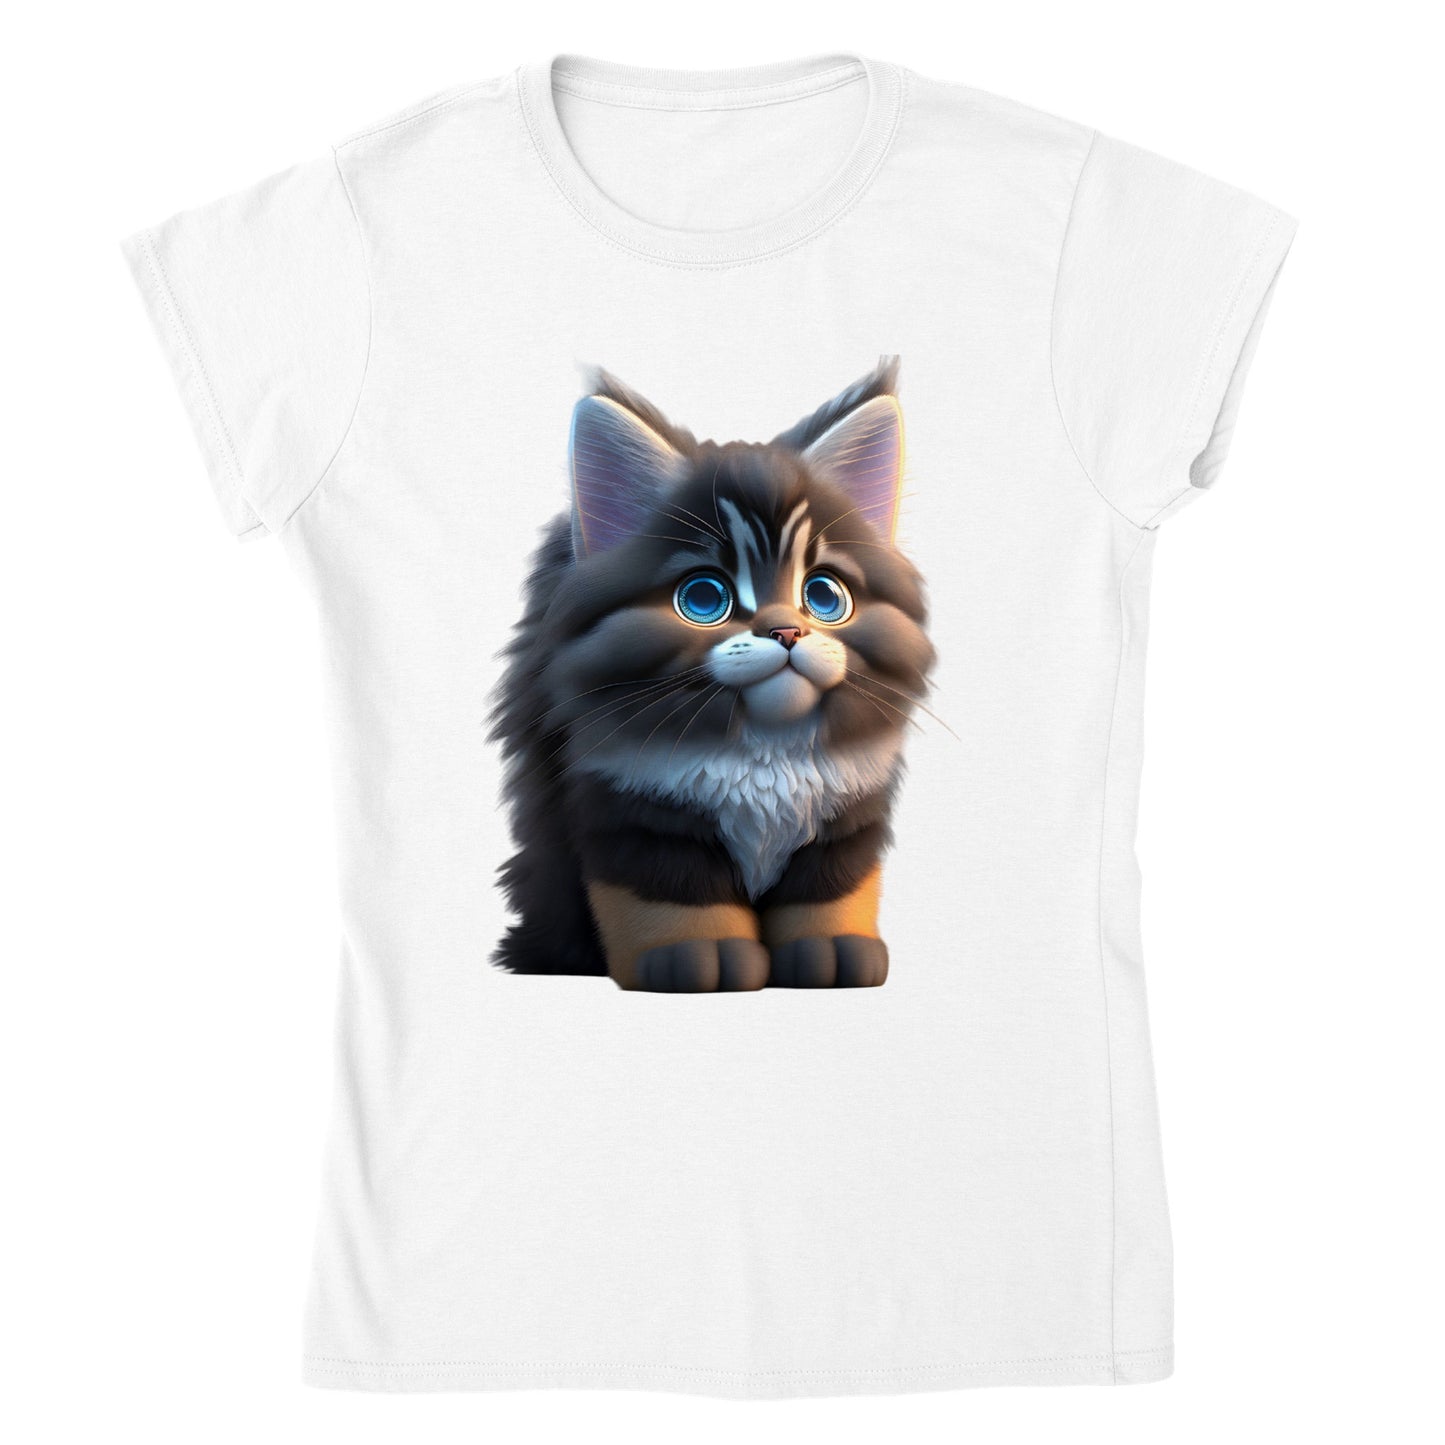 Adorable, Cool, Cute Cats and Kittens Toy - Classic Women’s Crewneck T-Shirt 5